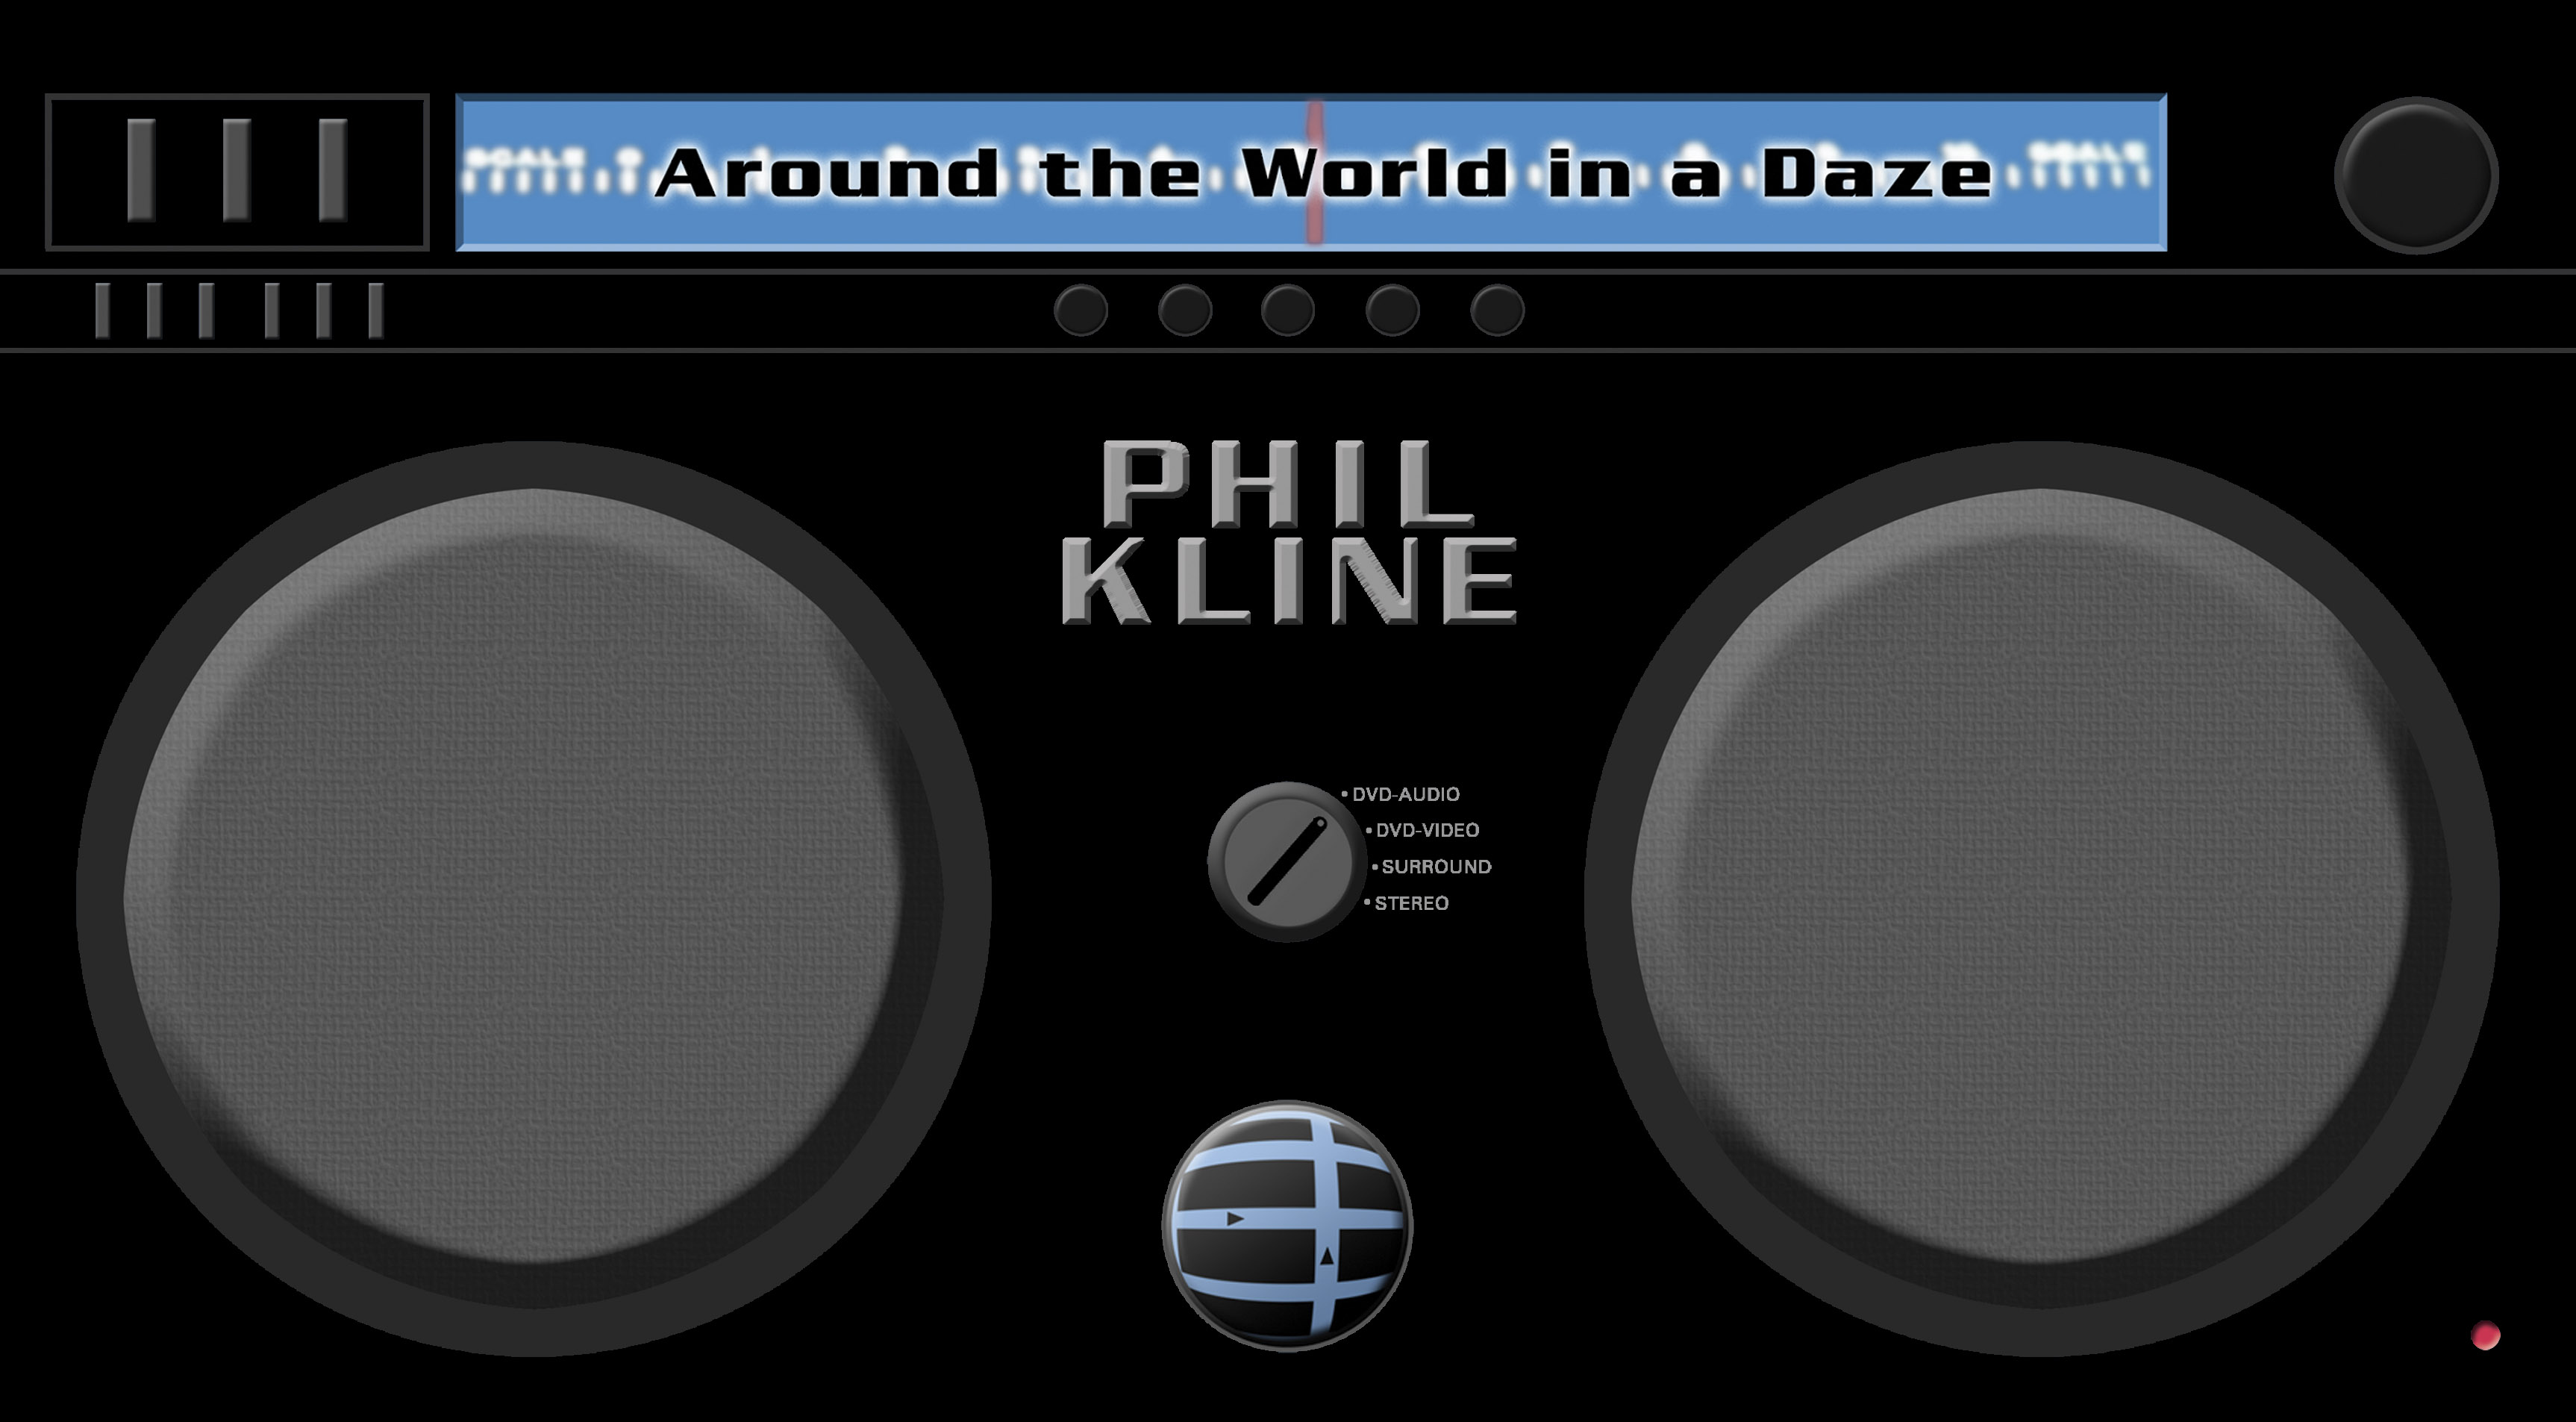 The oversized cover for Phil Kline's Around the World in a Daze which looks like a boombox.